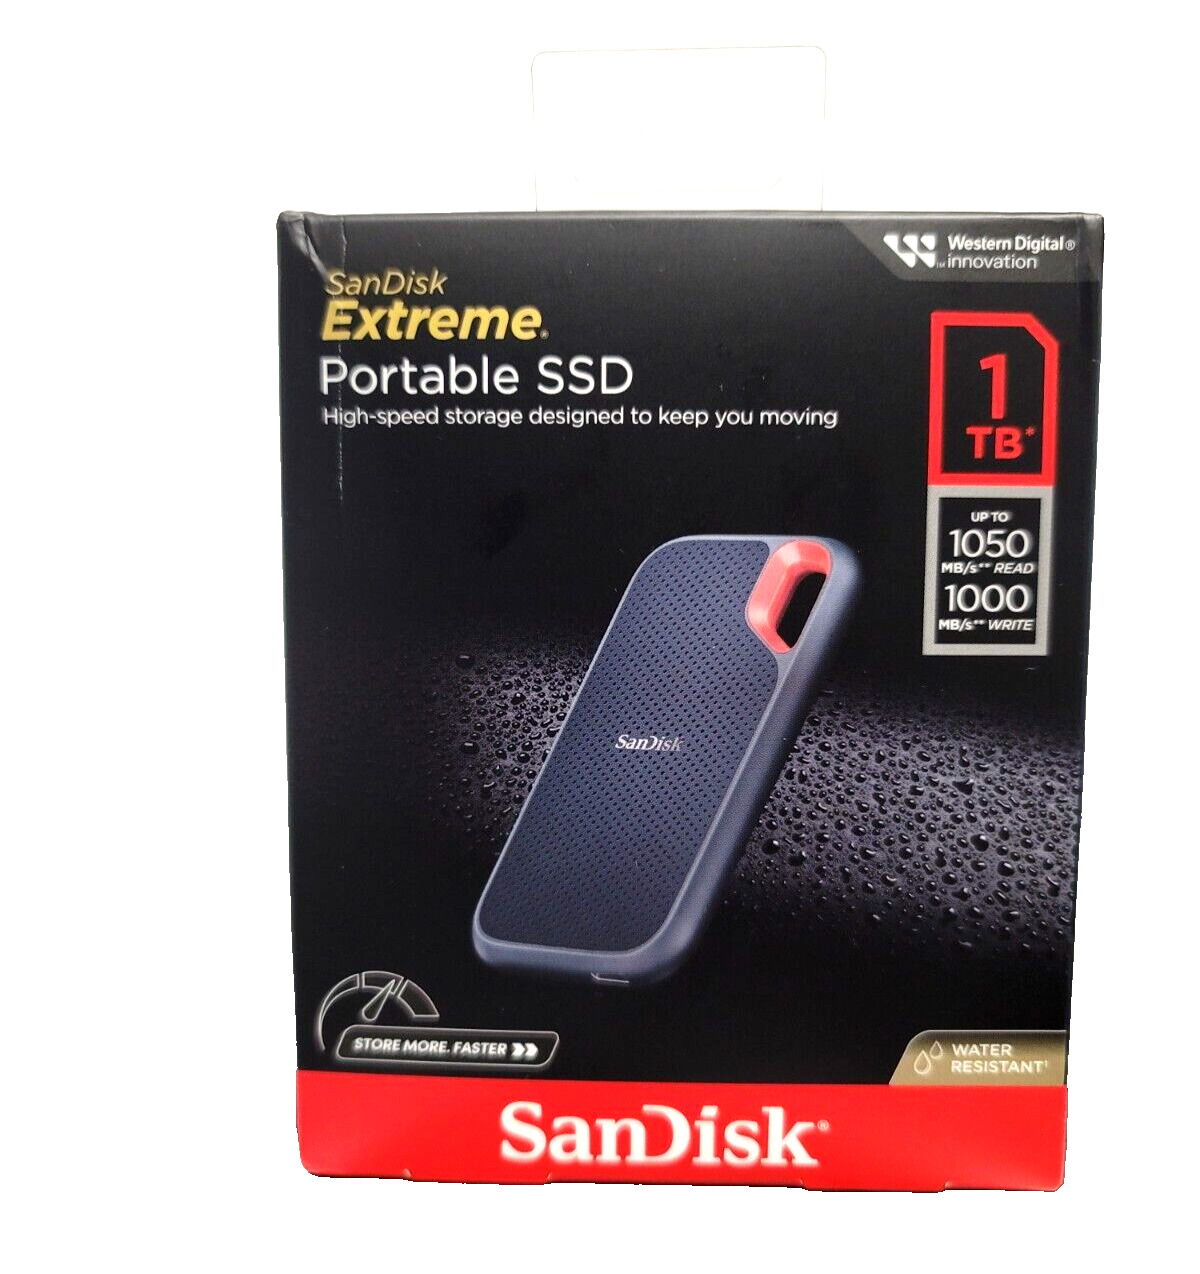 Sandisk Extreme Portable SSD 1TB Water Resistant  (New). 